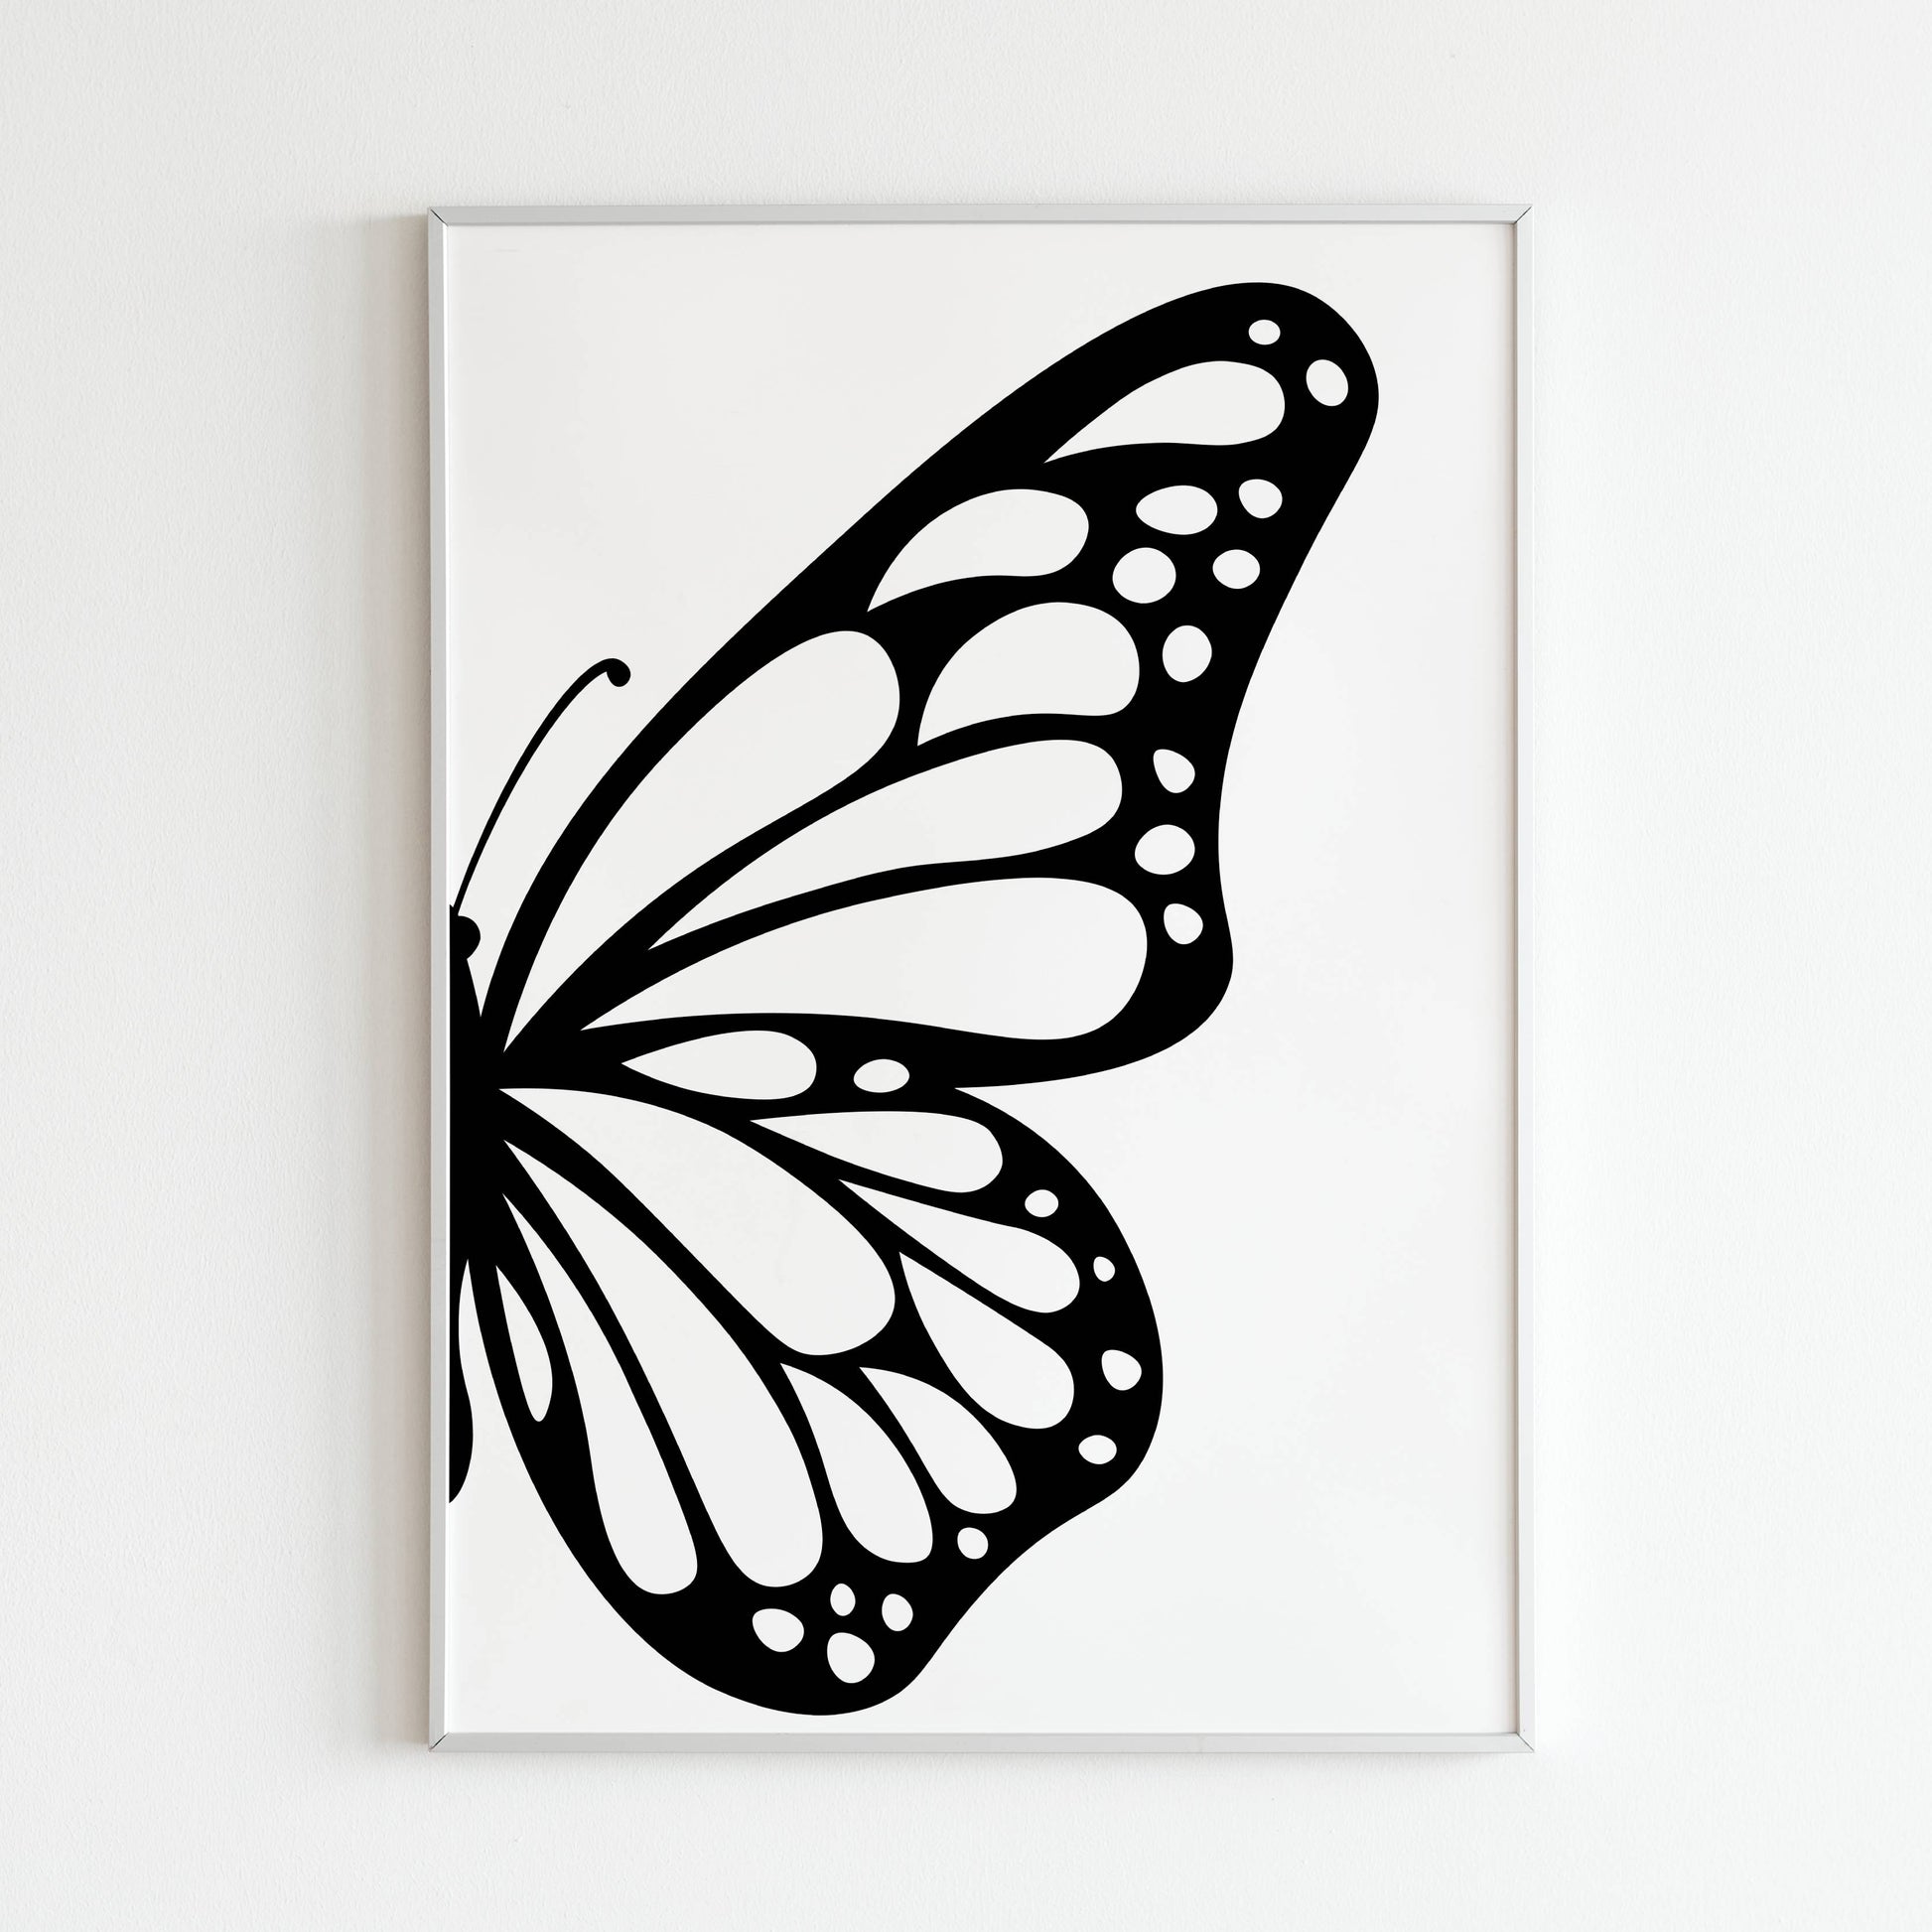 Downloadable "Butterfly Wing" wall art for a beautiful and symbolic piece.